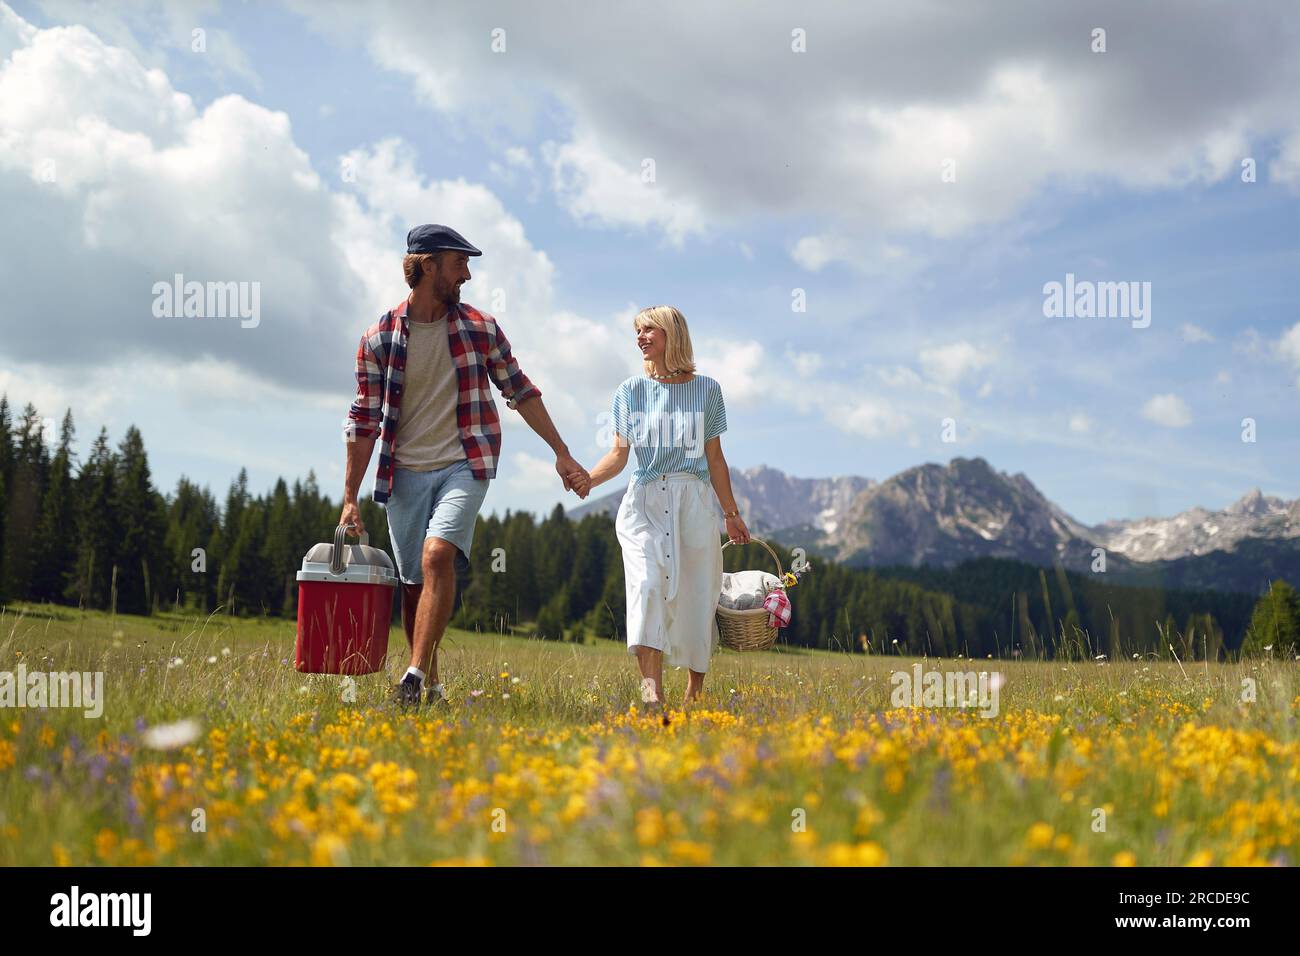 Young  smiling man and woman in love holding hands and walking in nature on a beautiful  day. Couple is holding picnic equipment. Stock Photo